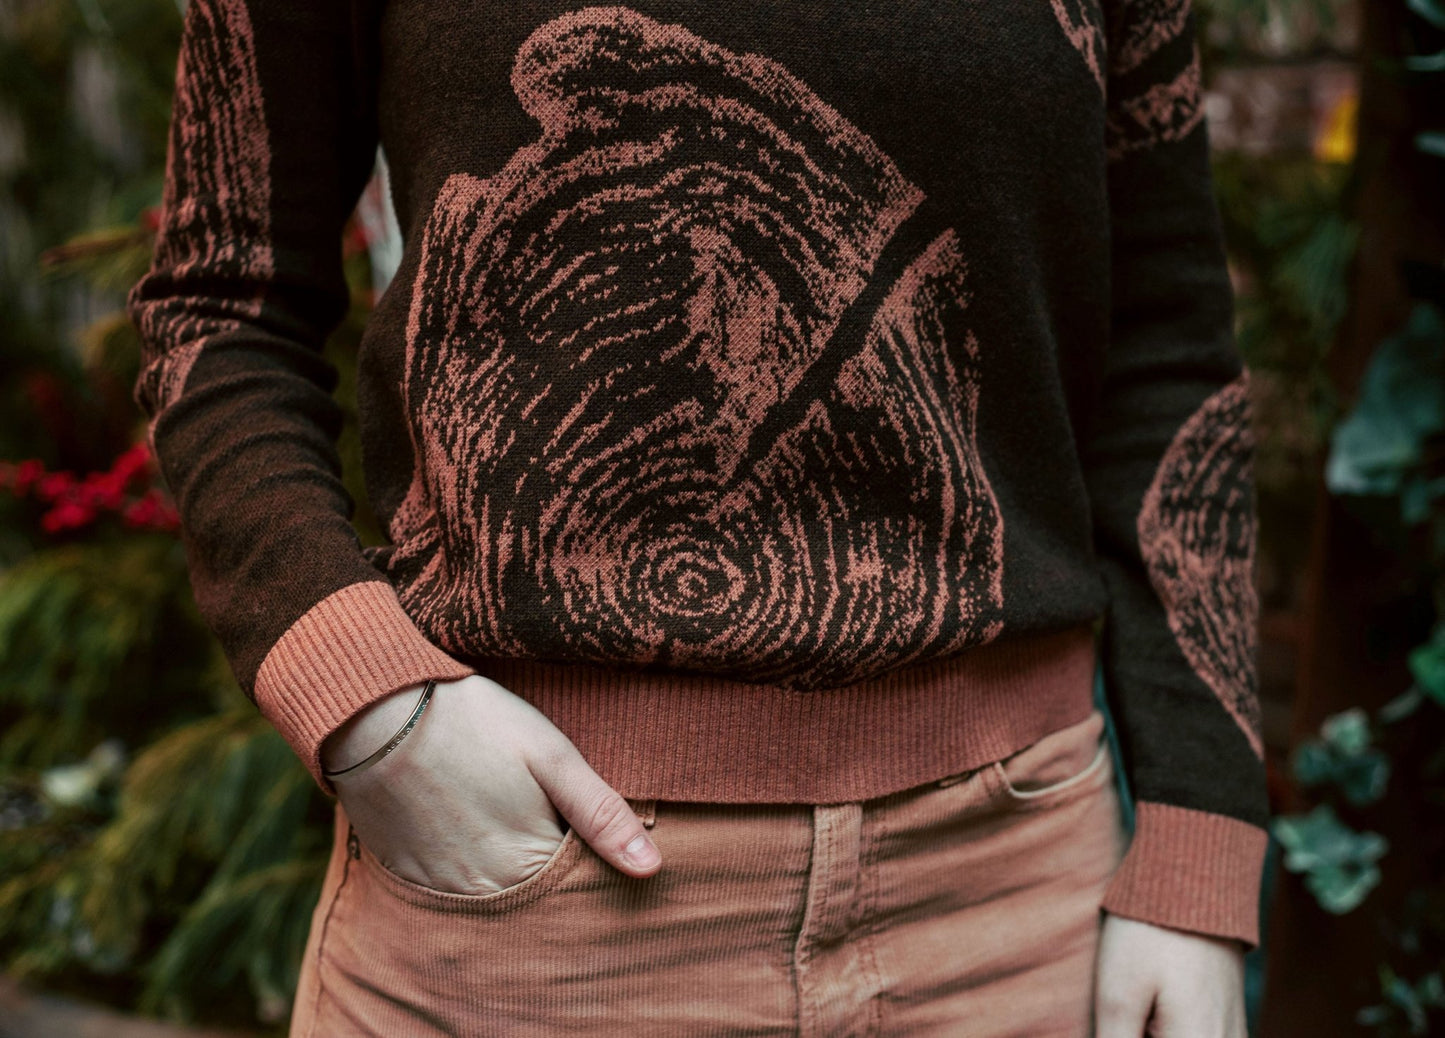 Tree Ring Print | Gender Neutral Jacquard Knit Sweater - Love With Pride Apparel